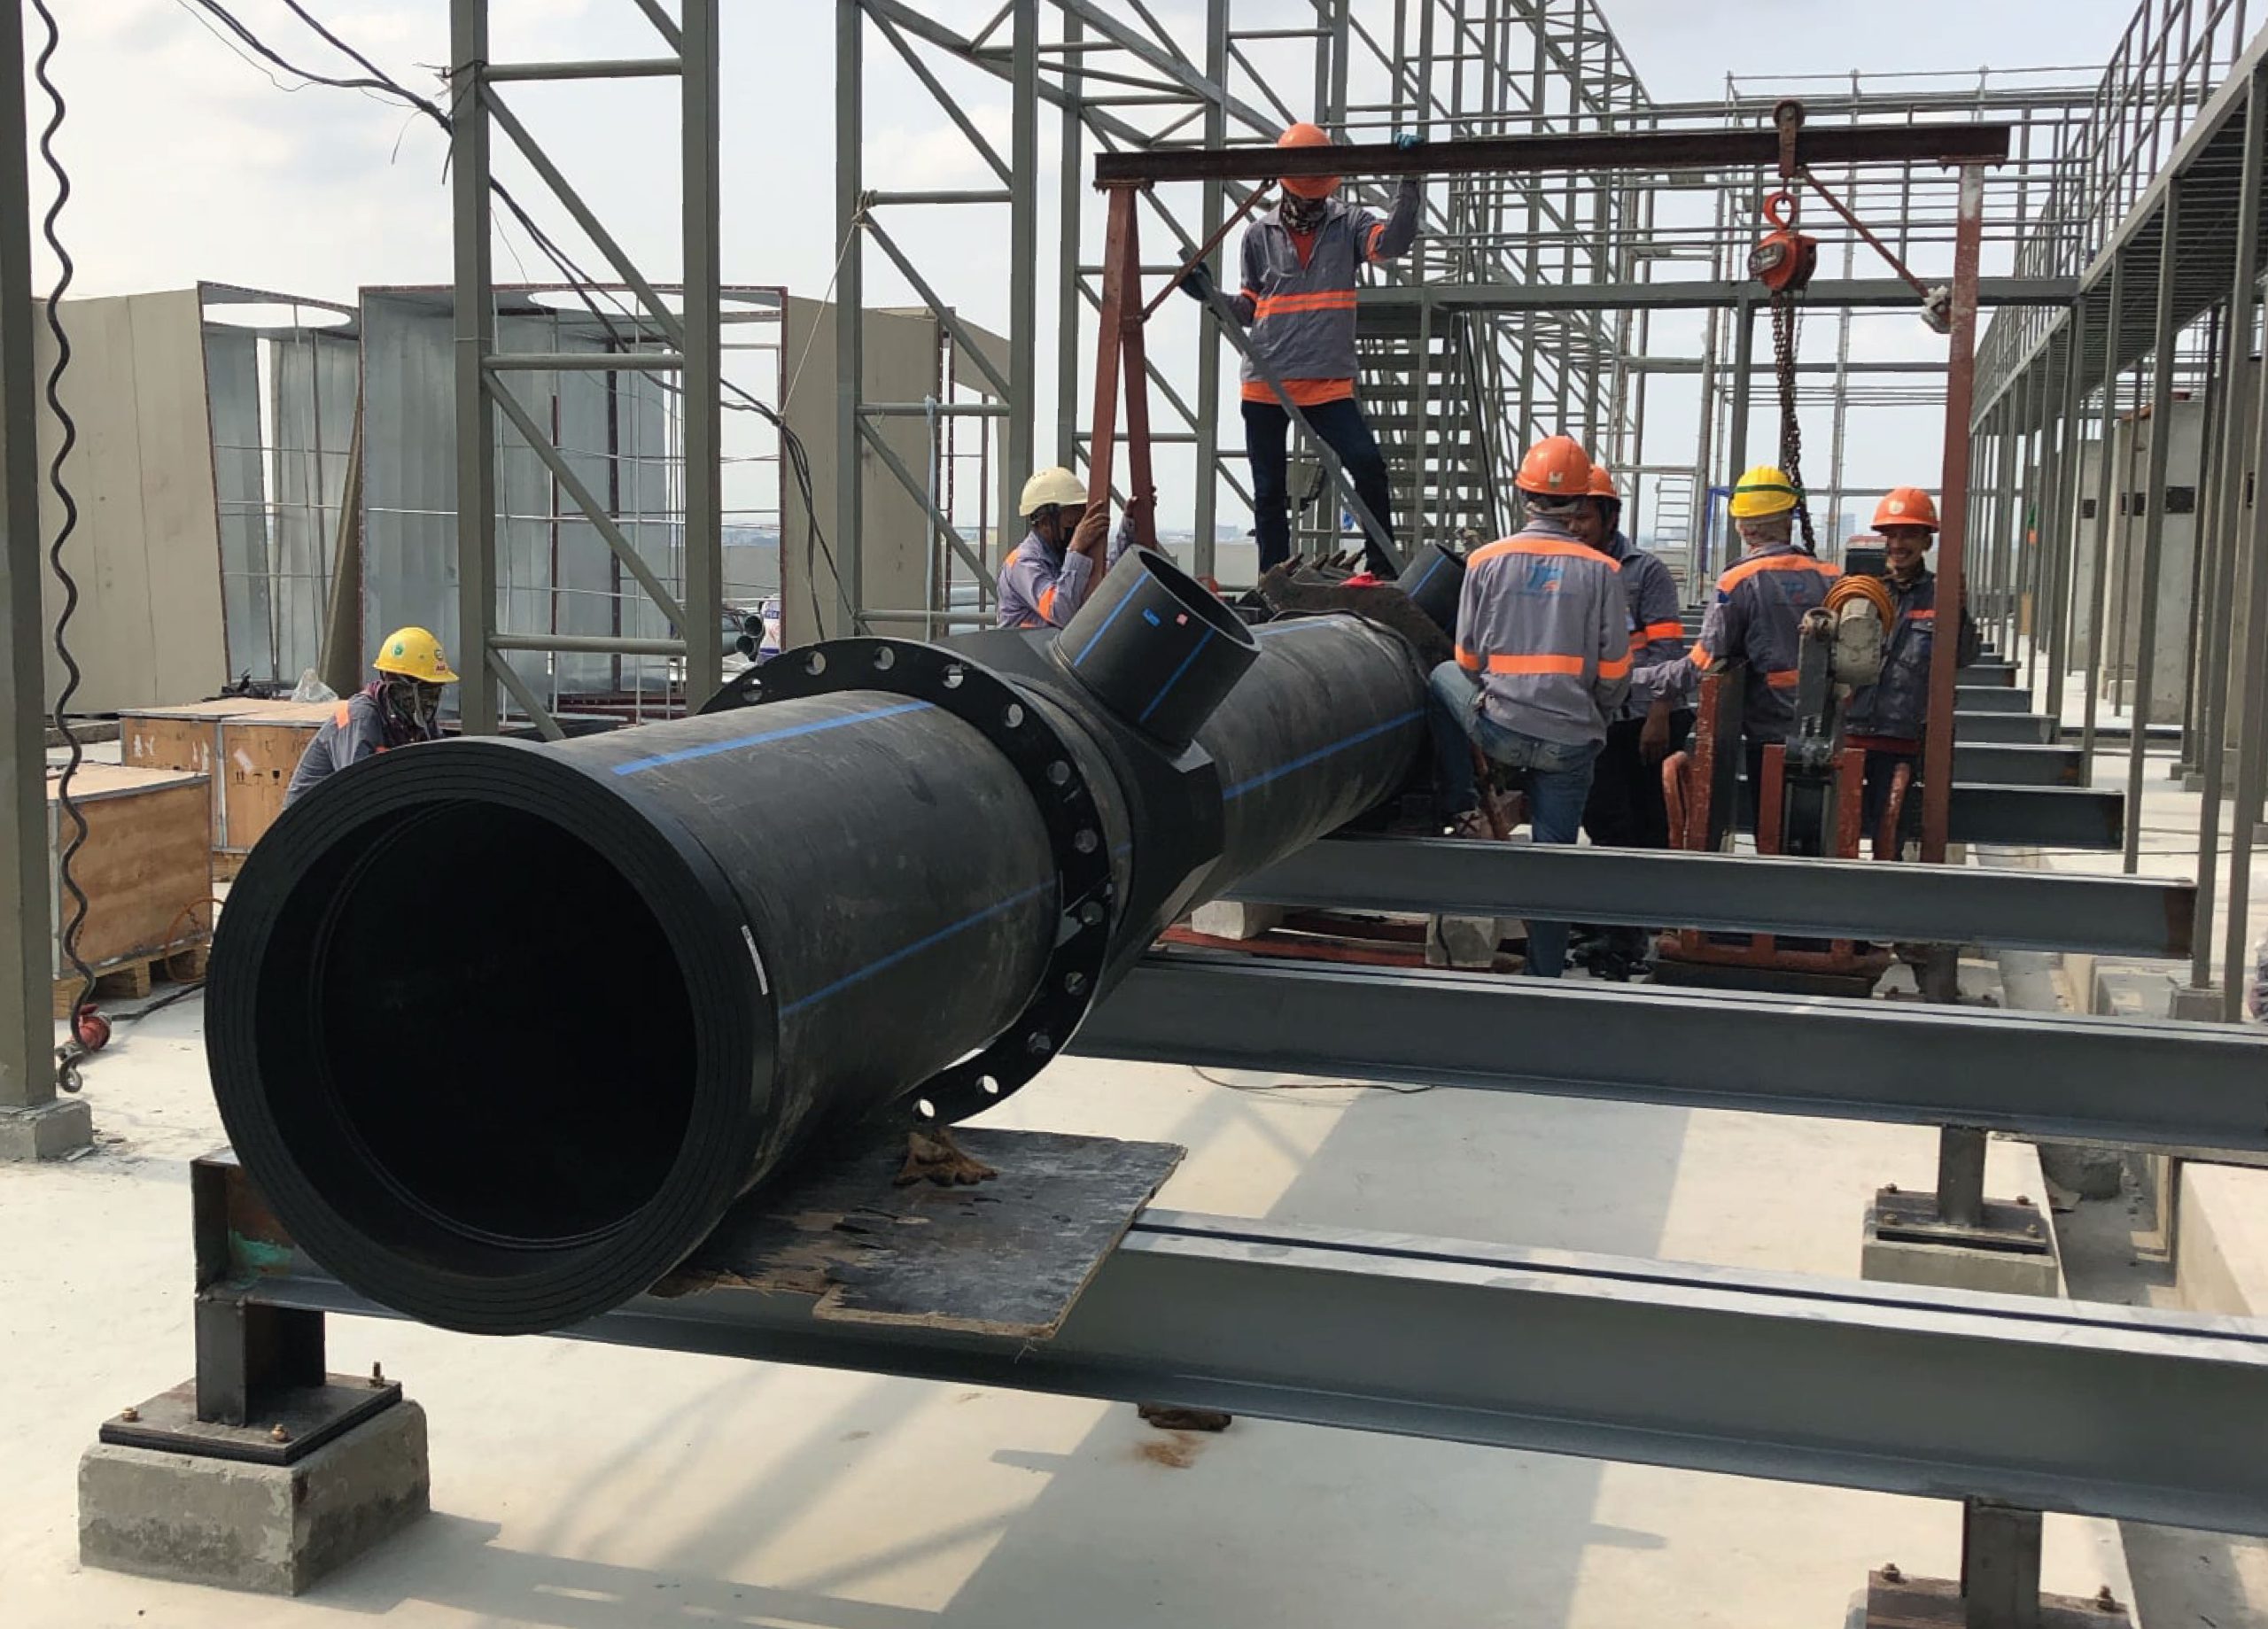 Engineer laying HDPE pipes for cooling system in construction building